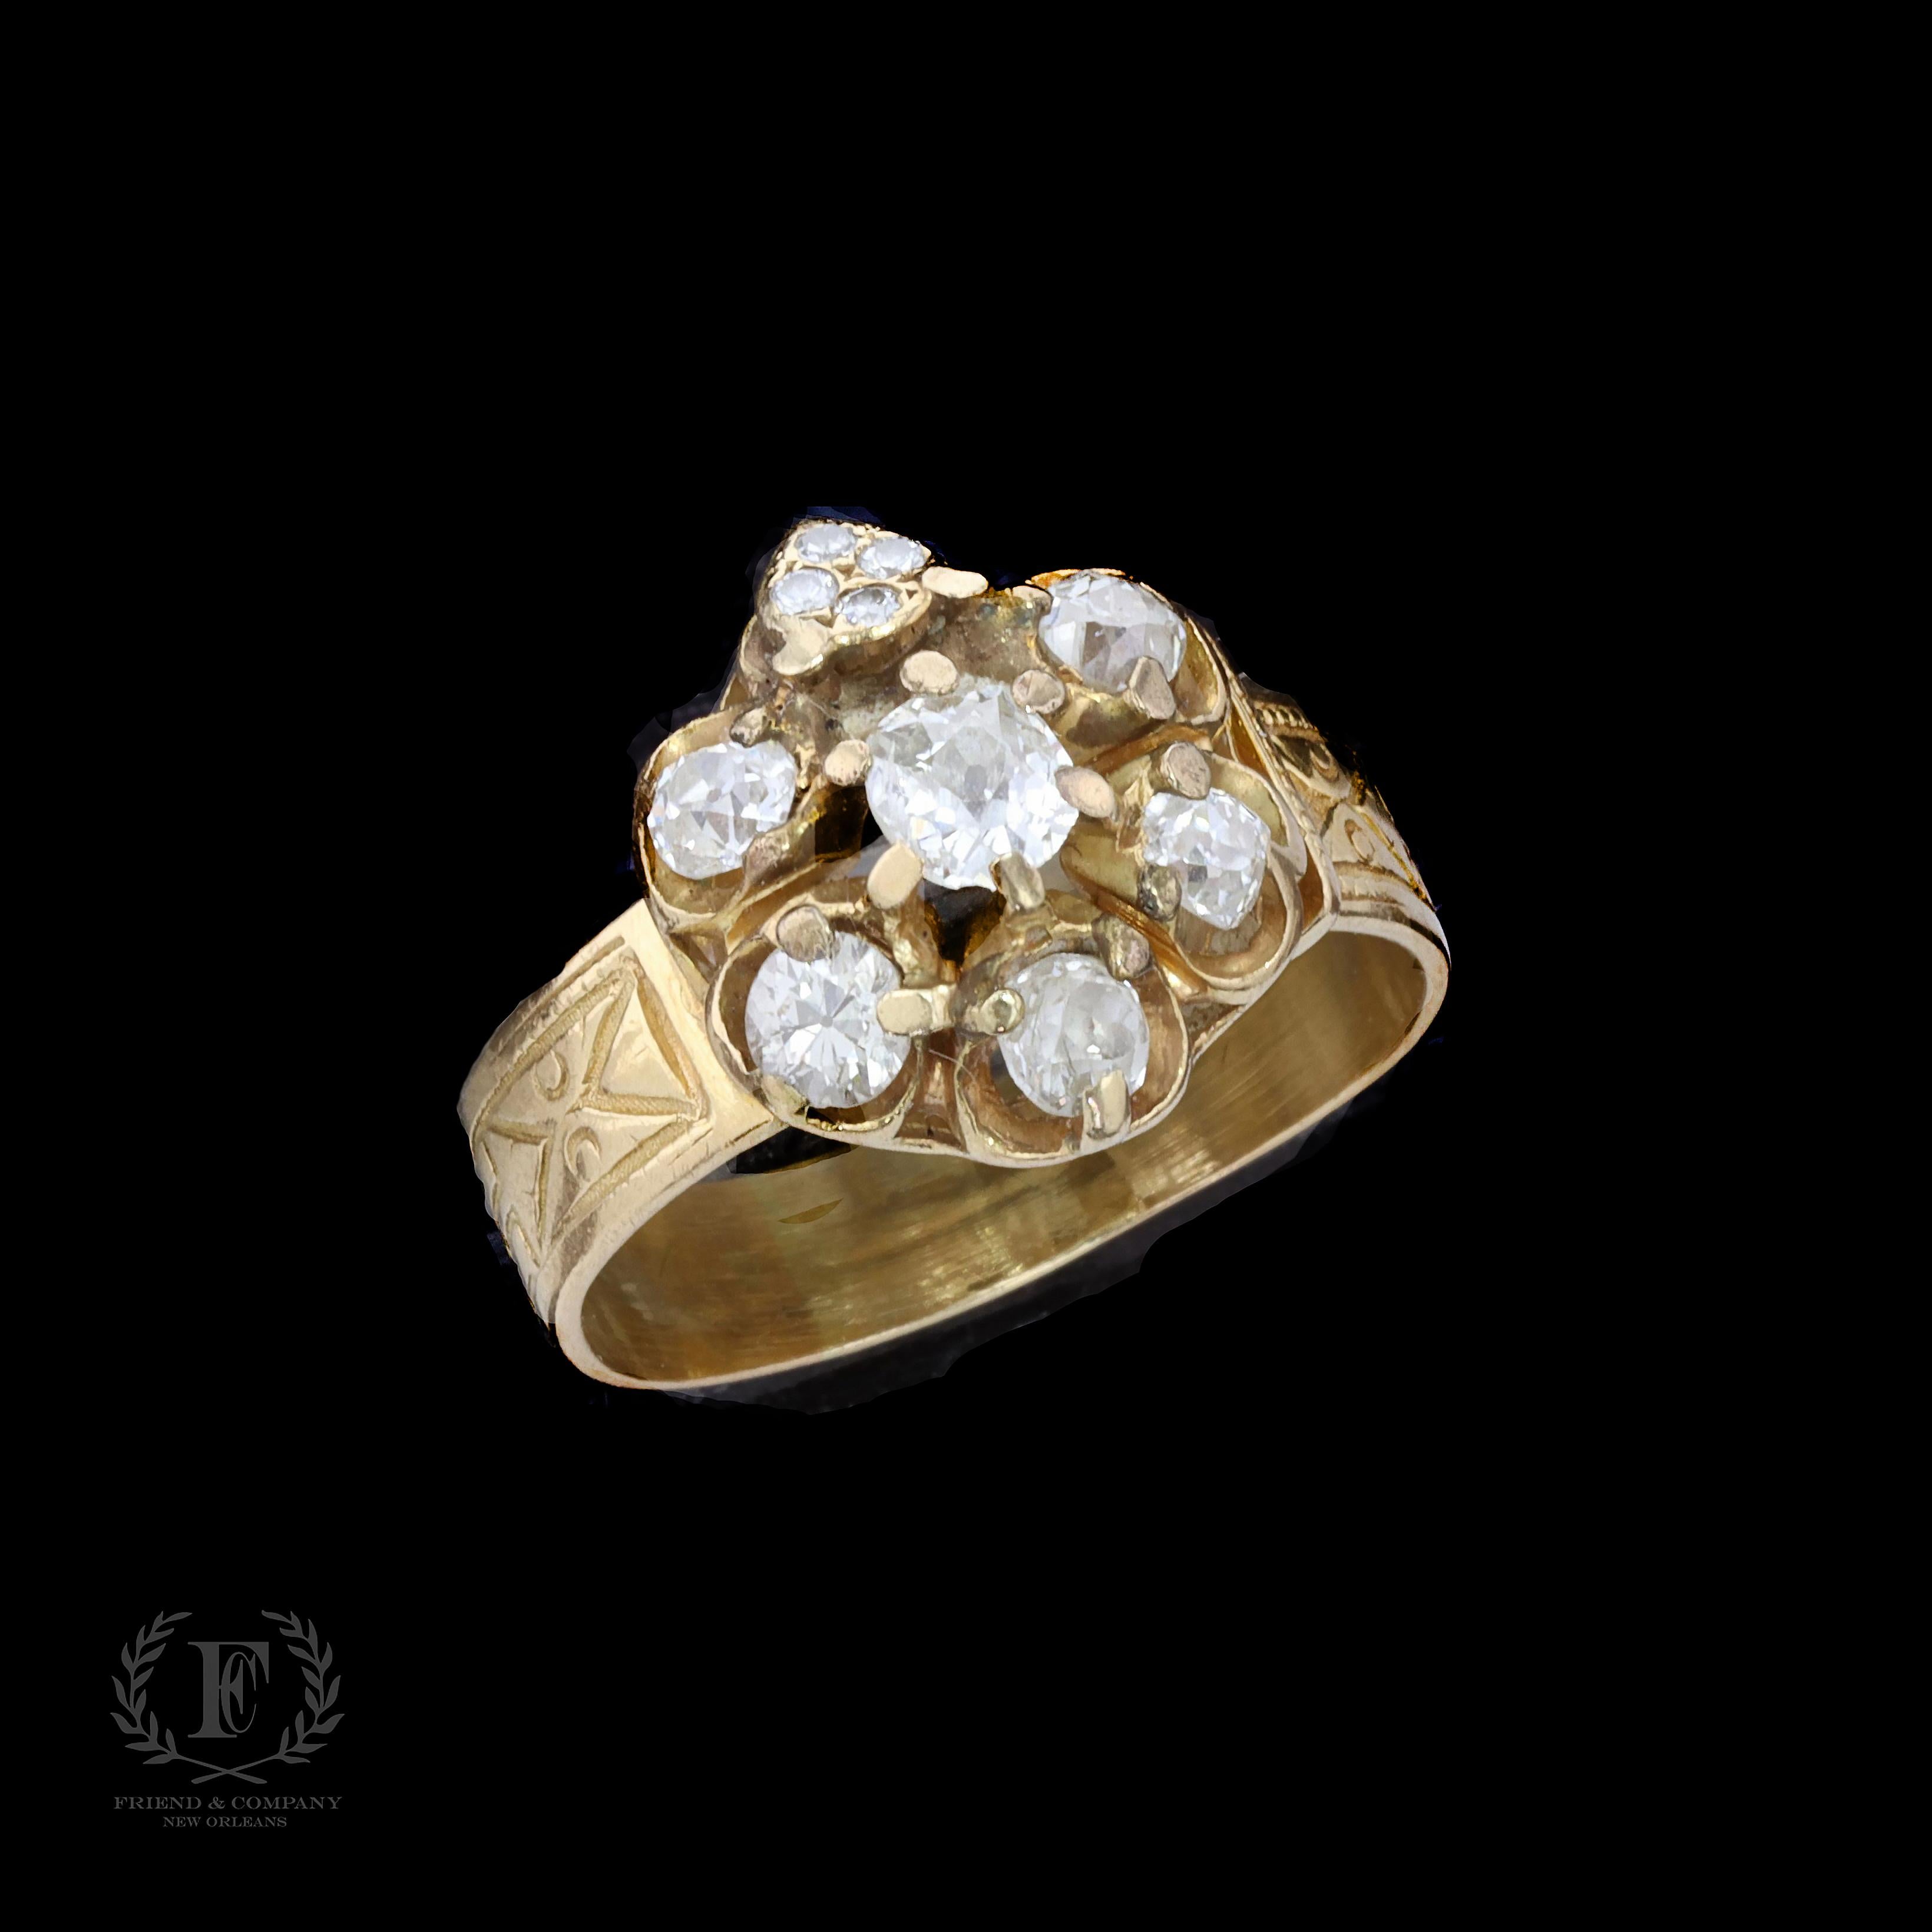 This unique diamond flower ring is set with sparkling old mine and round cut diamonds that weigh approximately 1.00 carat. The color of these diamonds is I-J with VS clarity. The ring weighs 5.2 grams. It is size 7 1/4, but it can be re-sized.